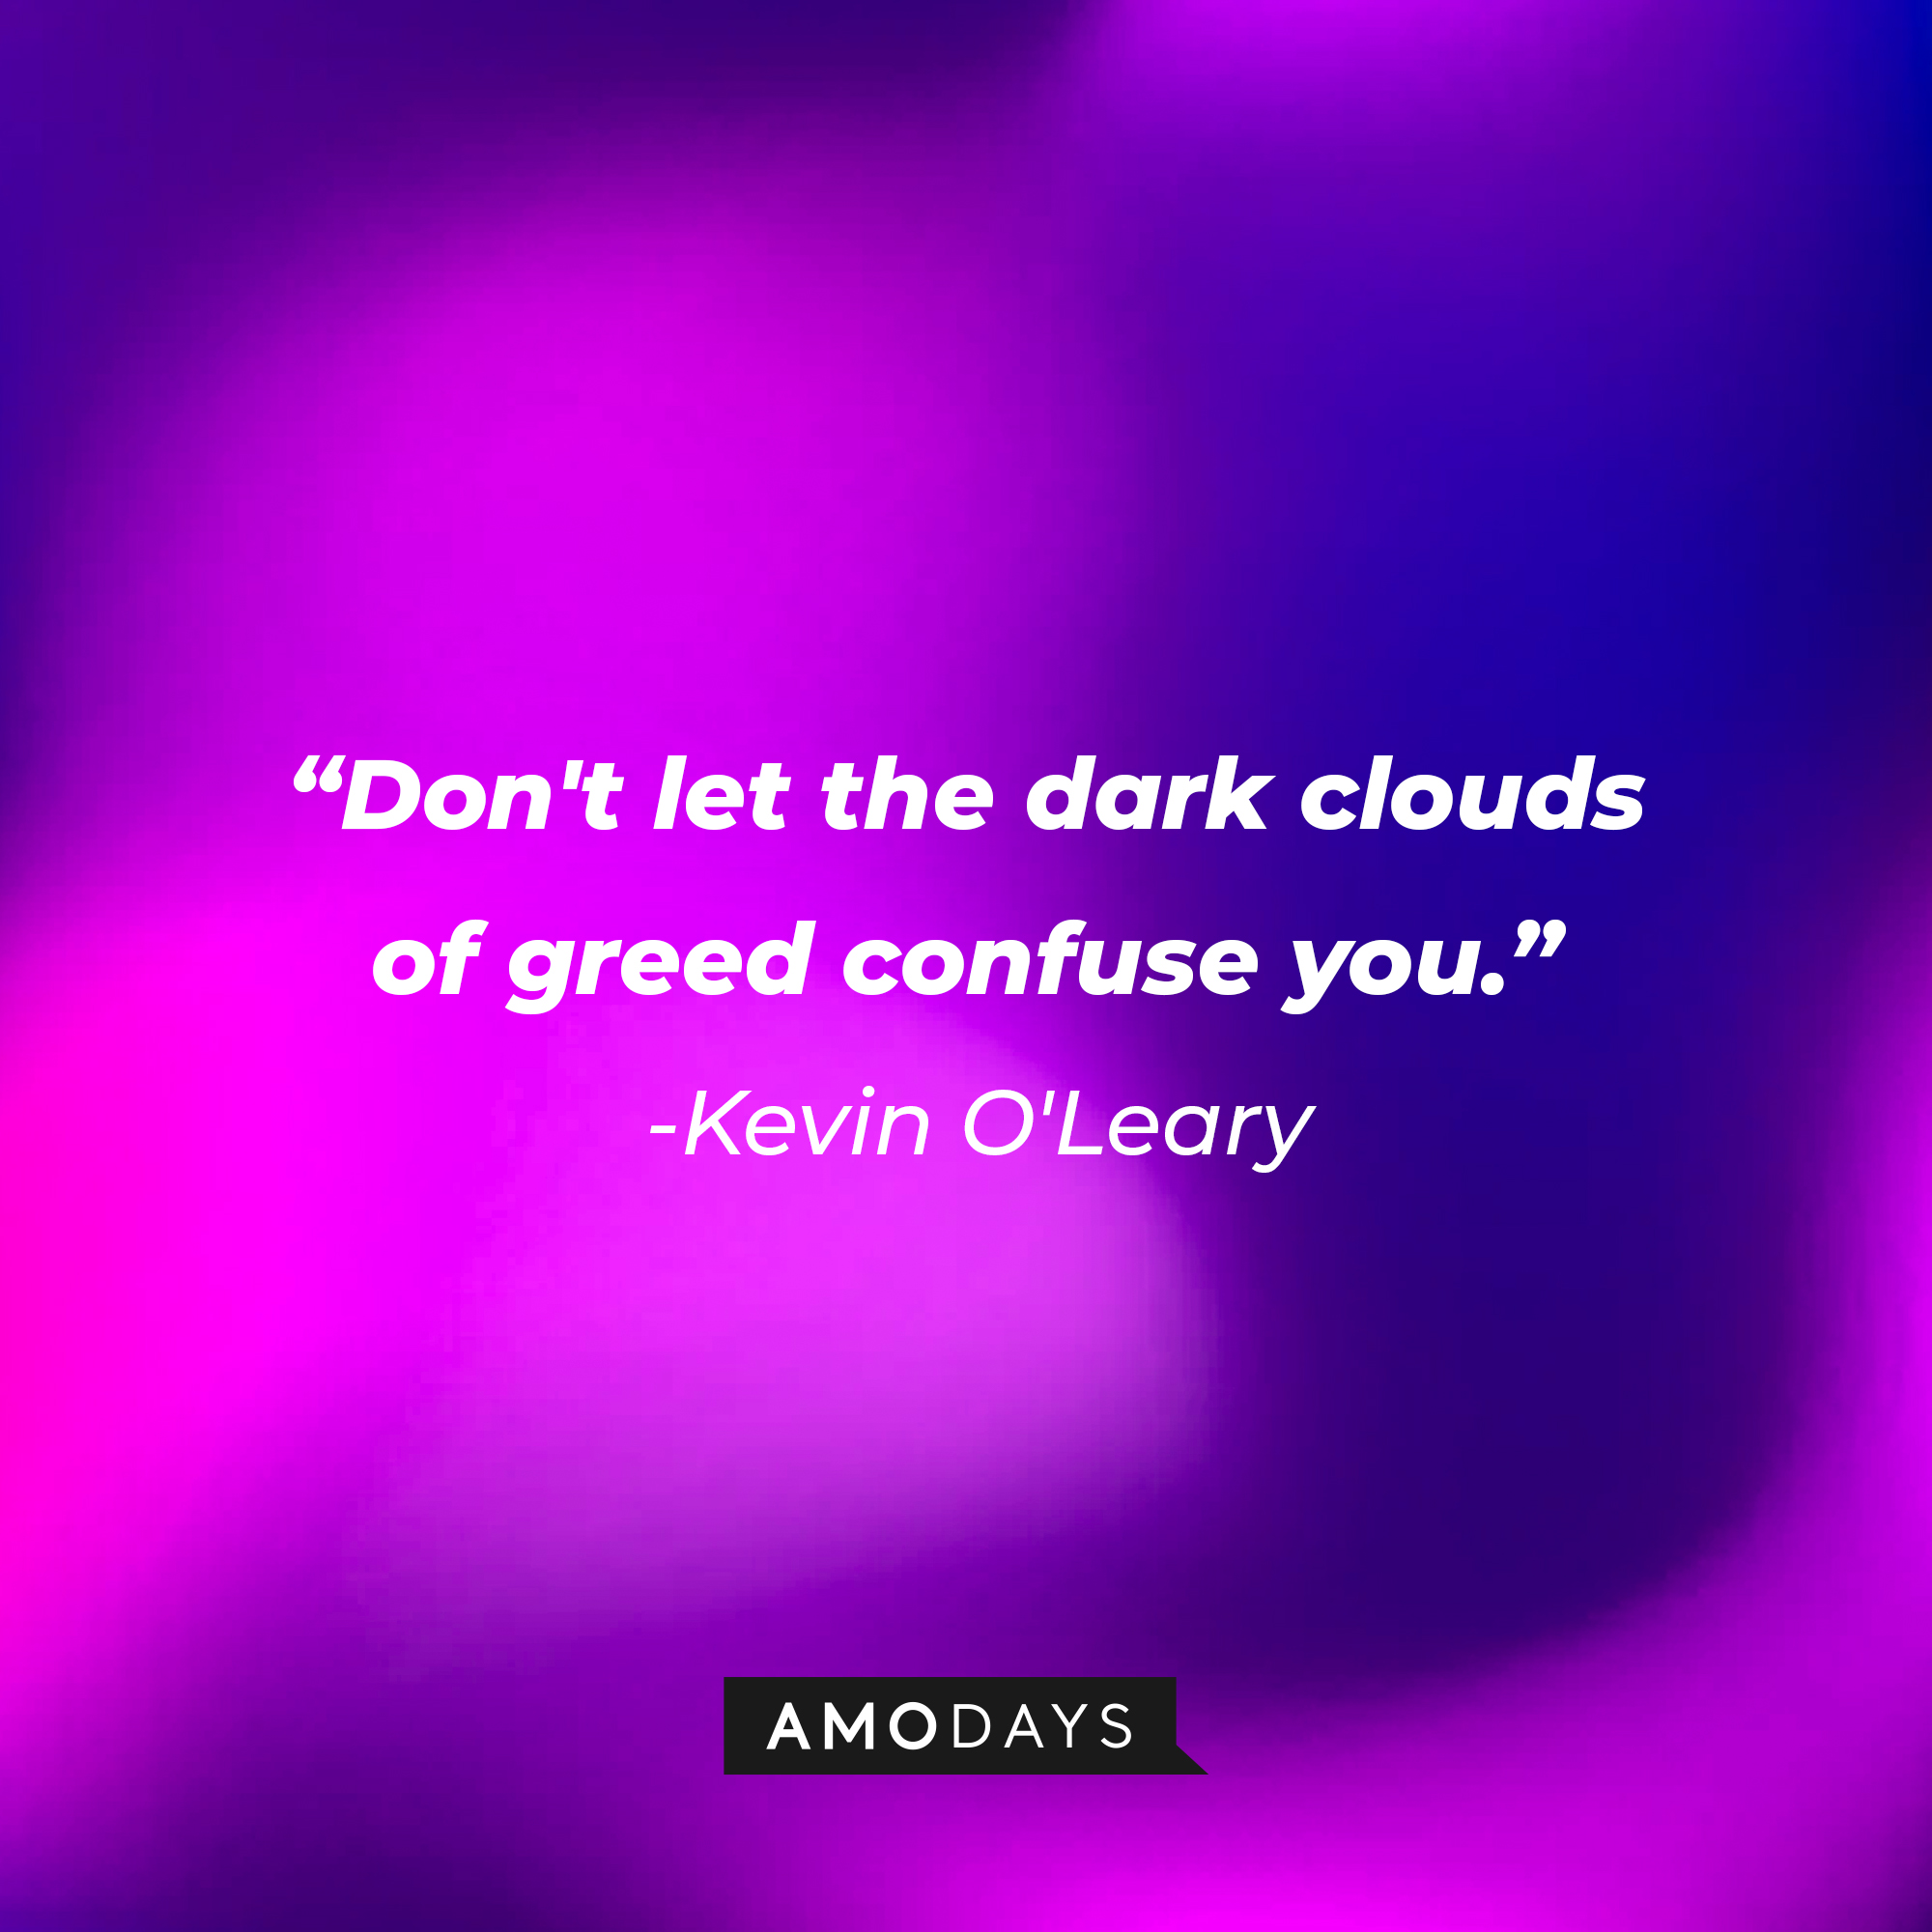 A photo with Kevin O'Leary's quote, "Don't let the dark clouds of greed confuse you." | Source: Amodays